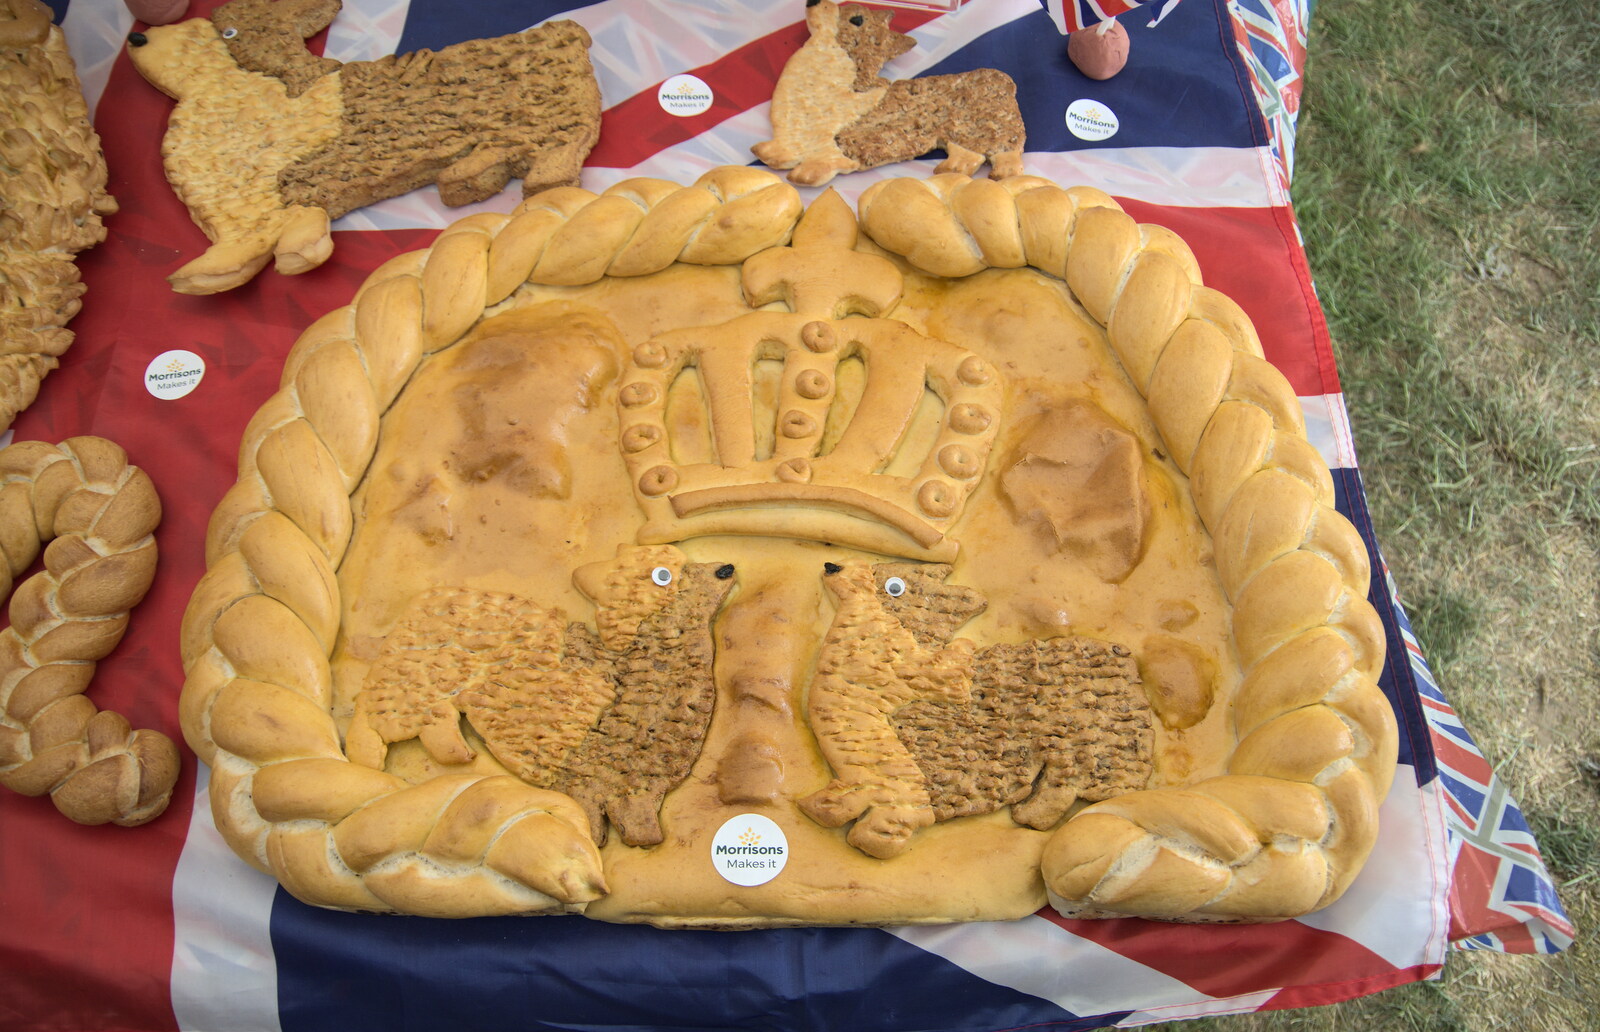 The Suffolk Show, Trinity Park, Ipswich - 1st June 2022: The Morissons stand has a Jubilee bread product